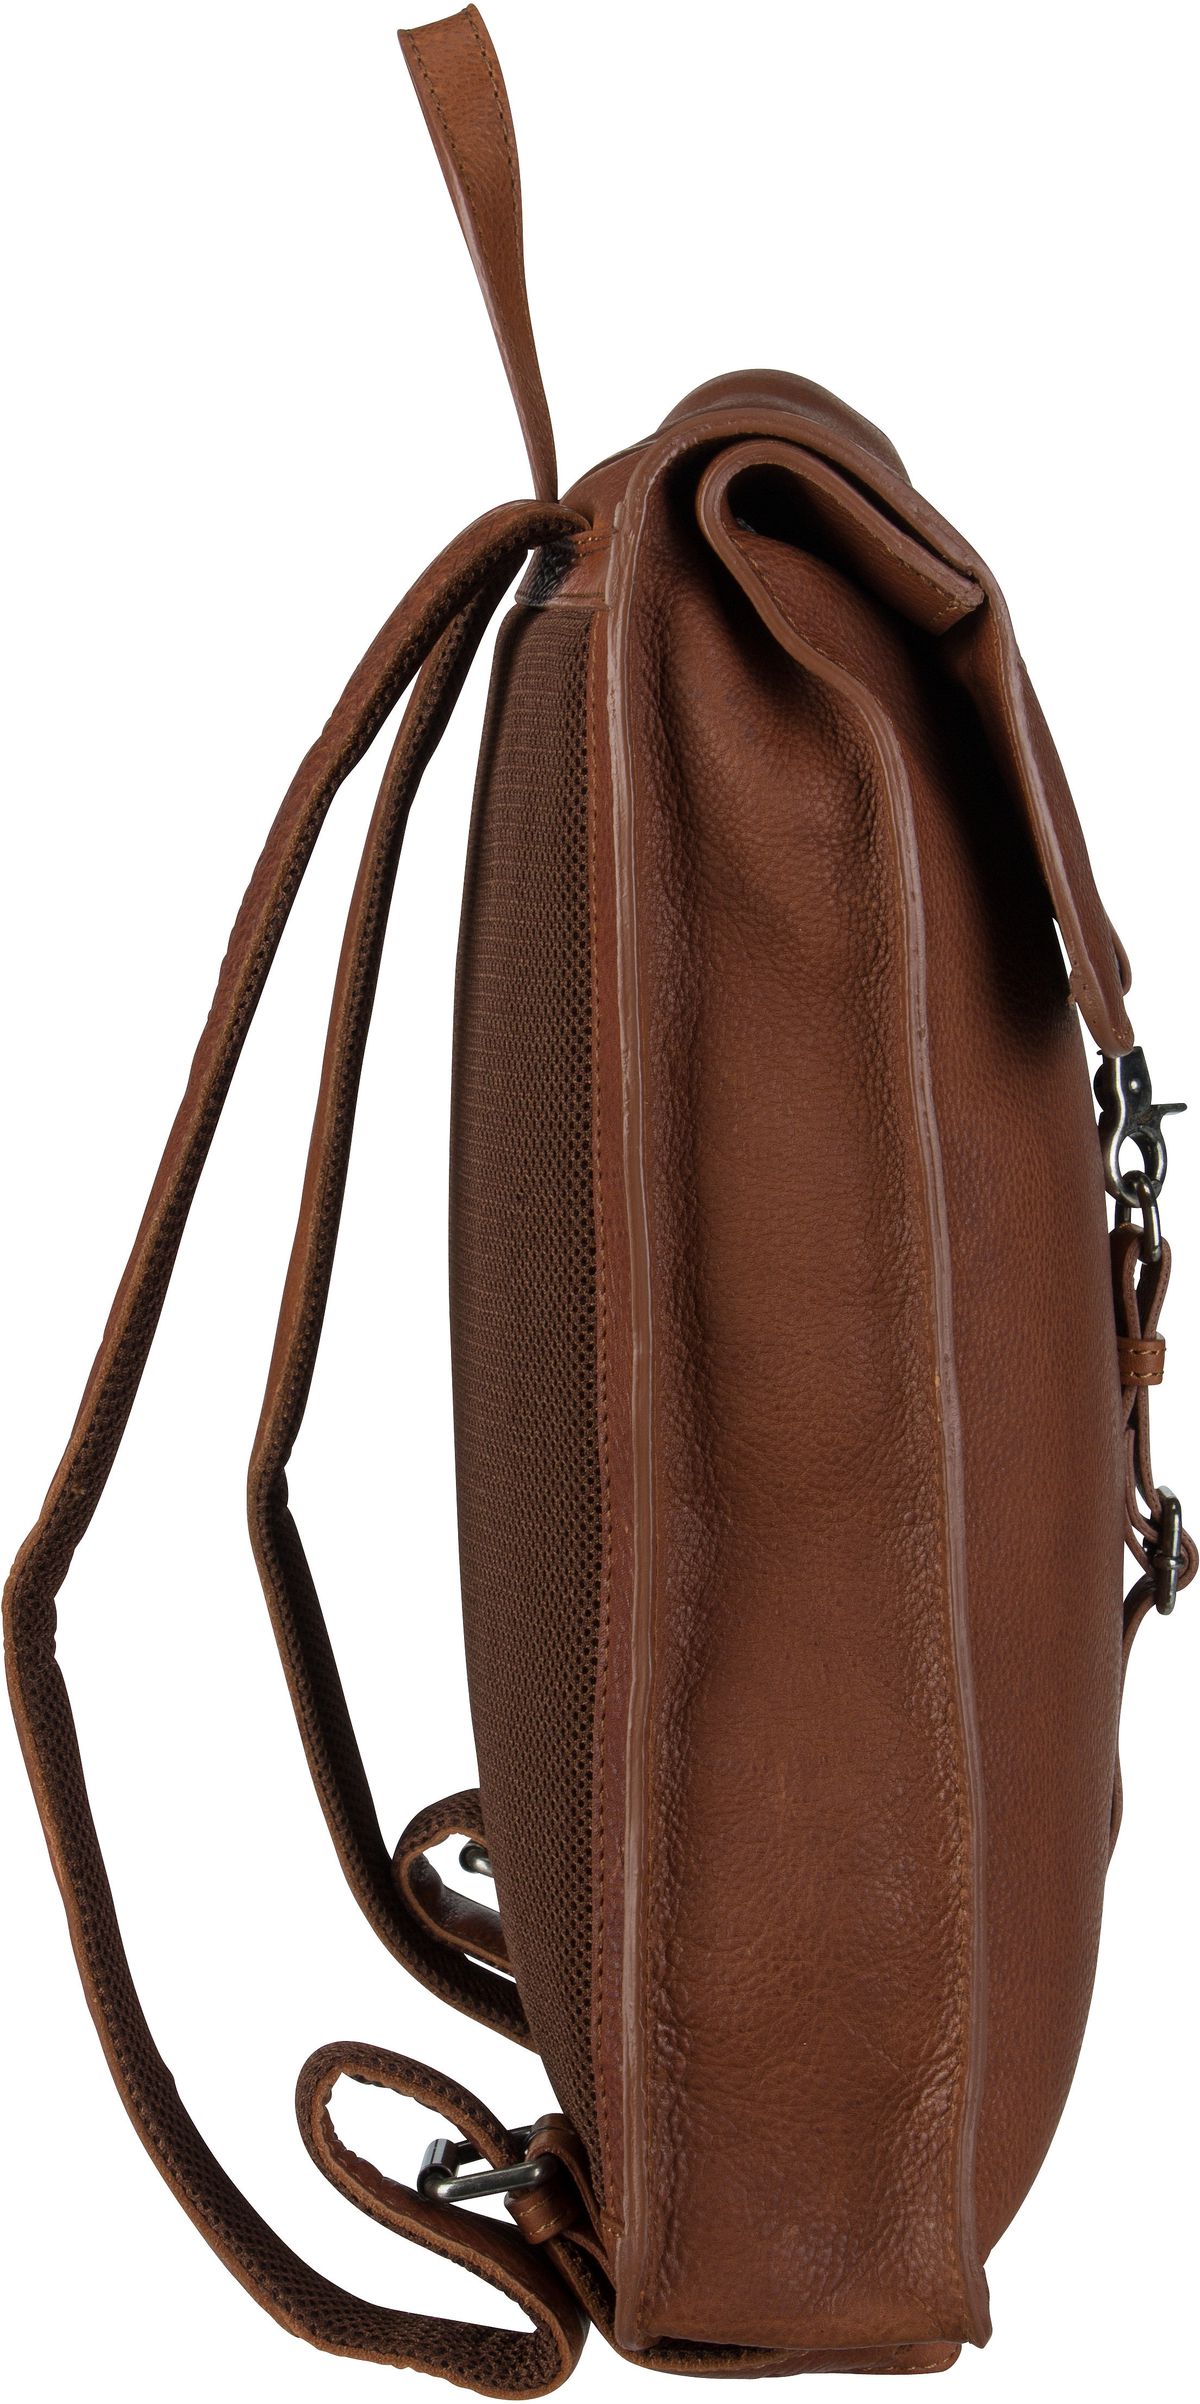 Burkely Antique Avery Backpack 6656 - Cognac